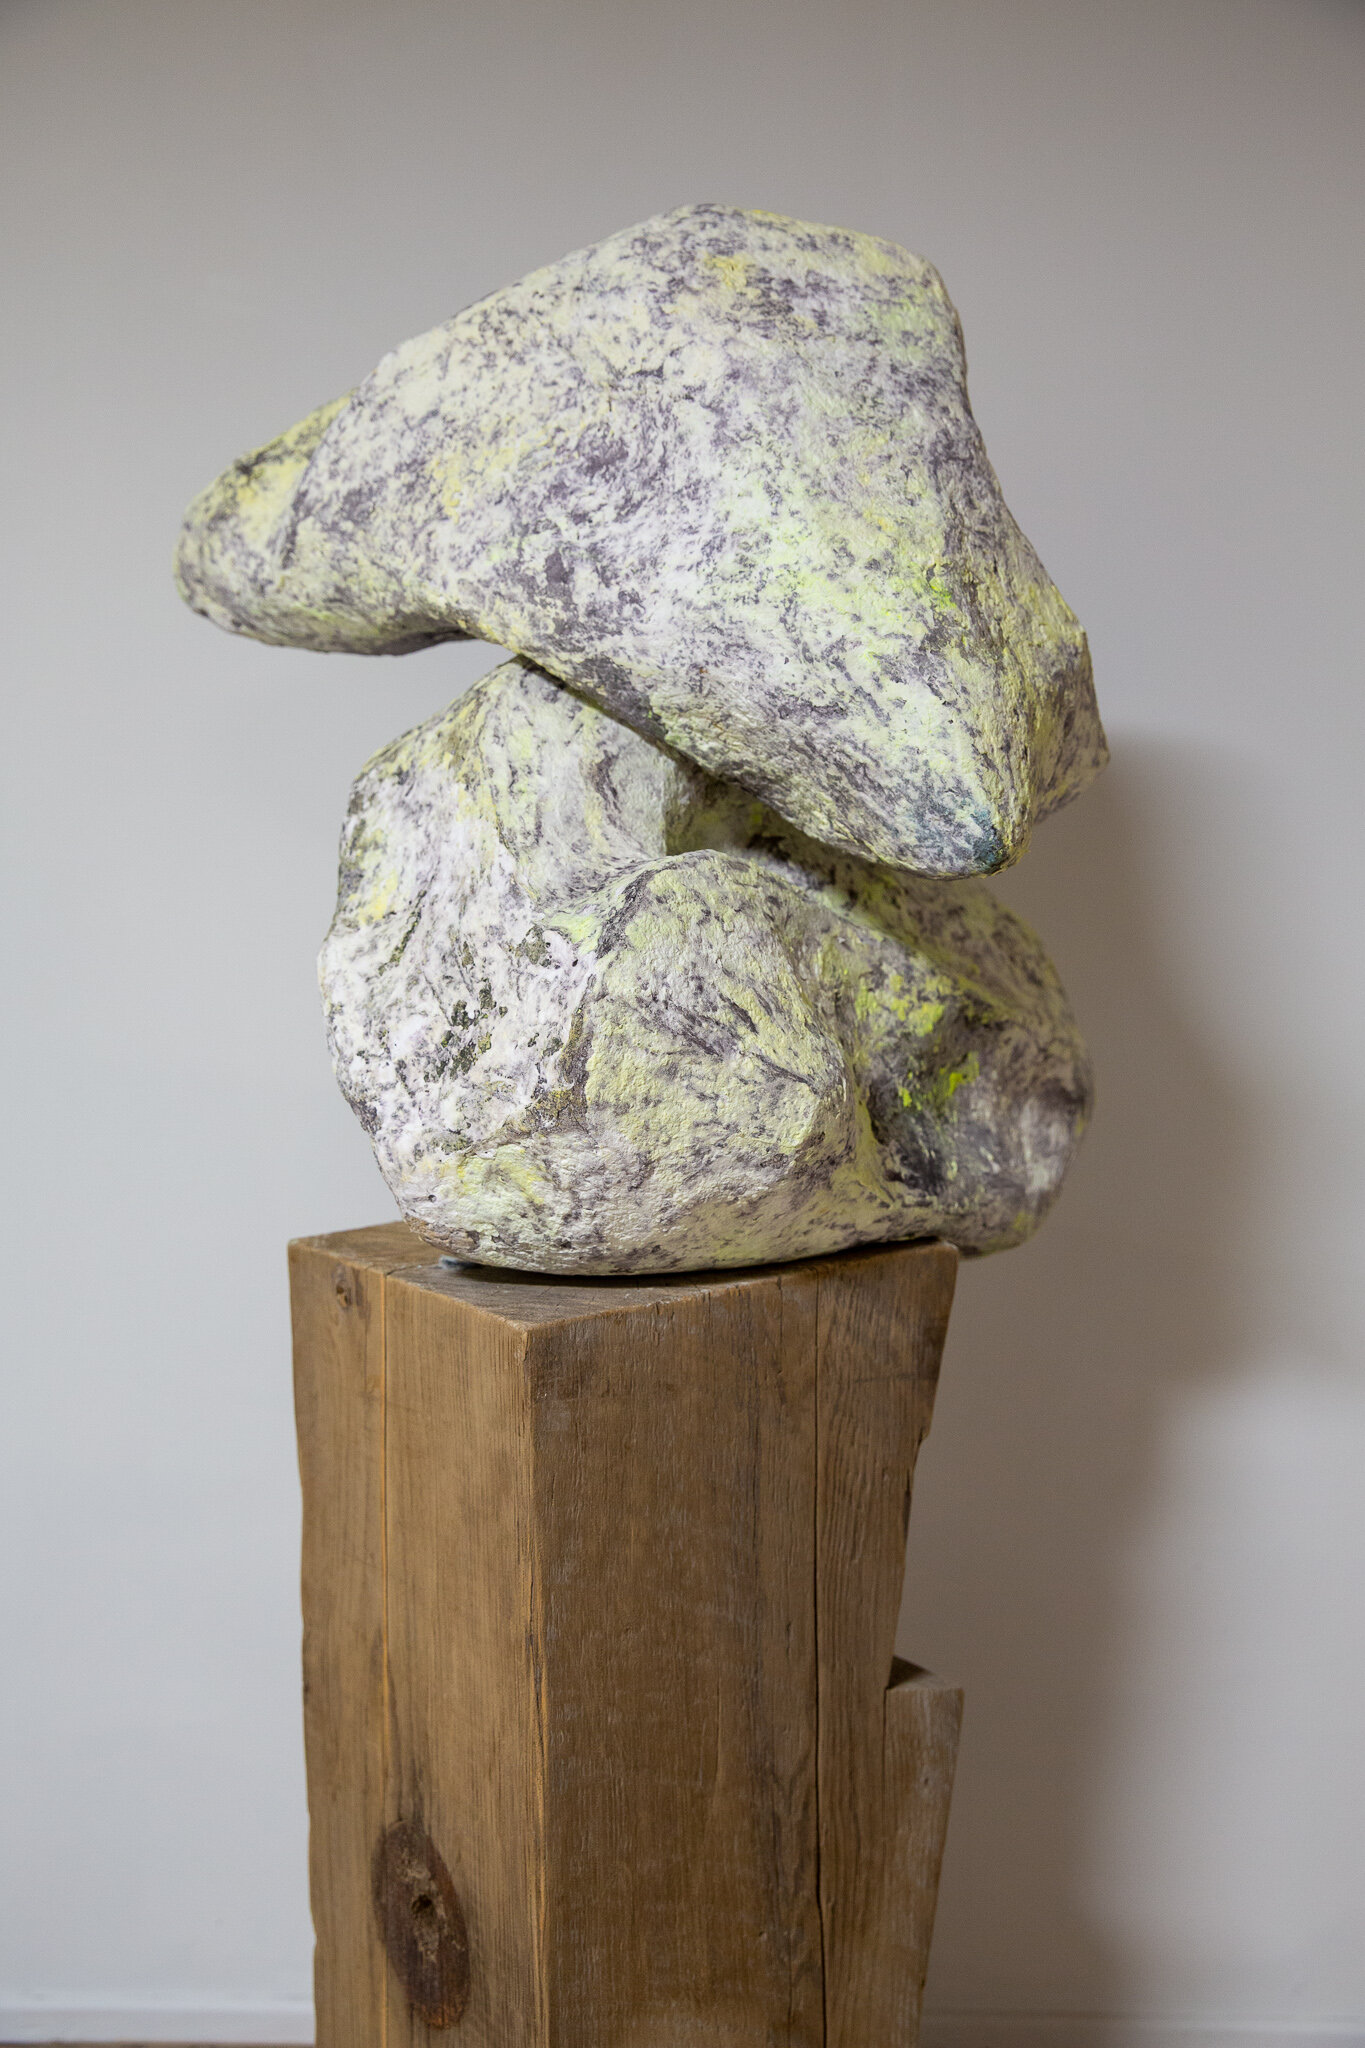   Stacked Bodies , 2020 Paper mache, paper pulp, liquid watercolor, wood, 47x24x20 inches   